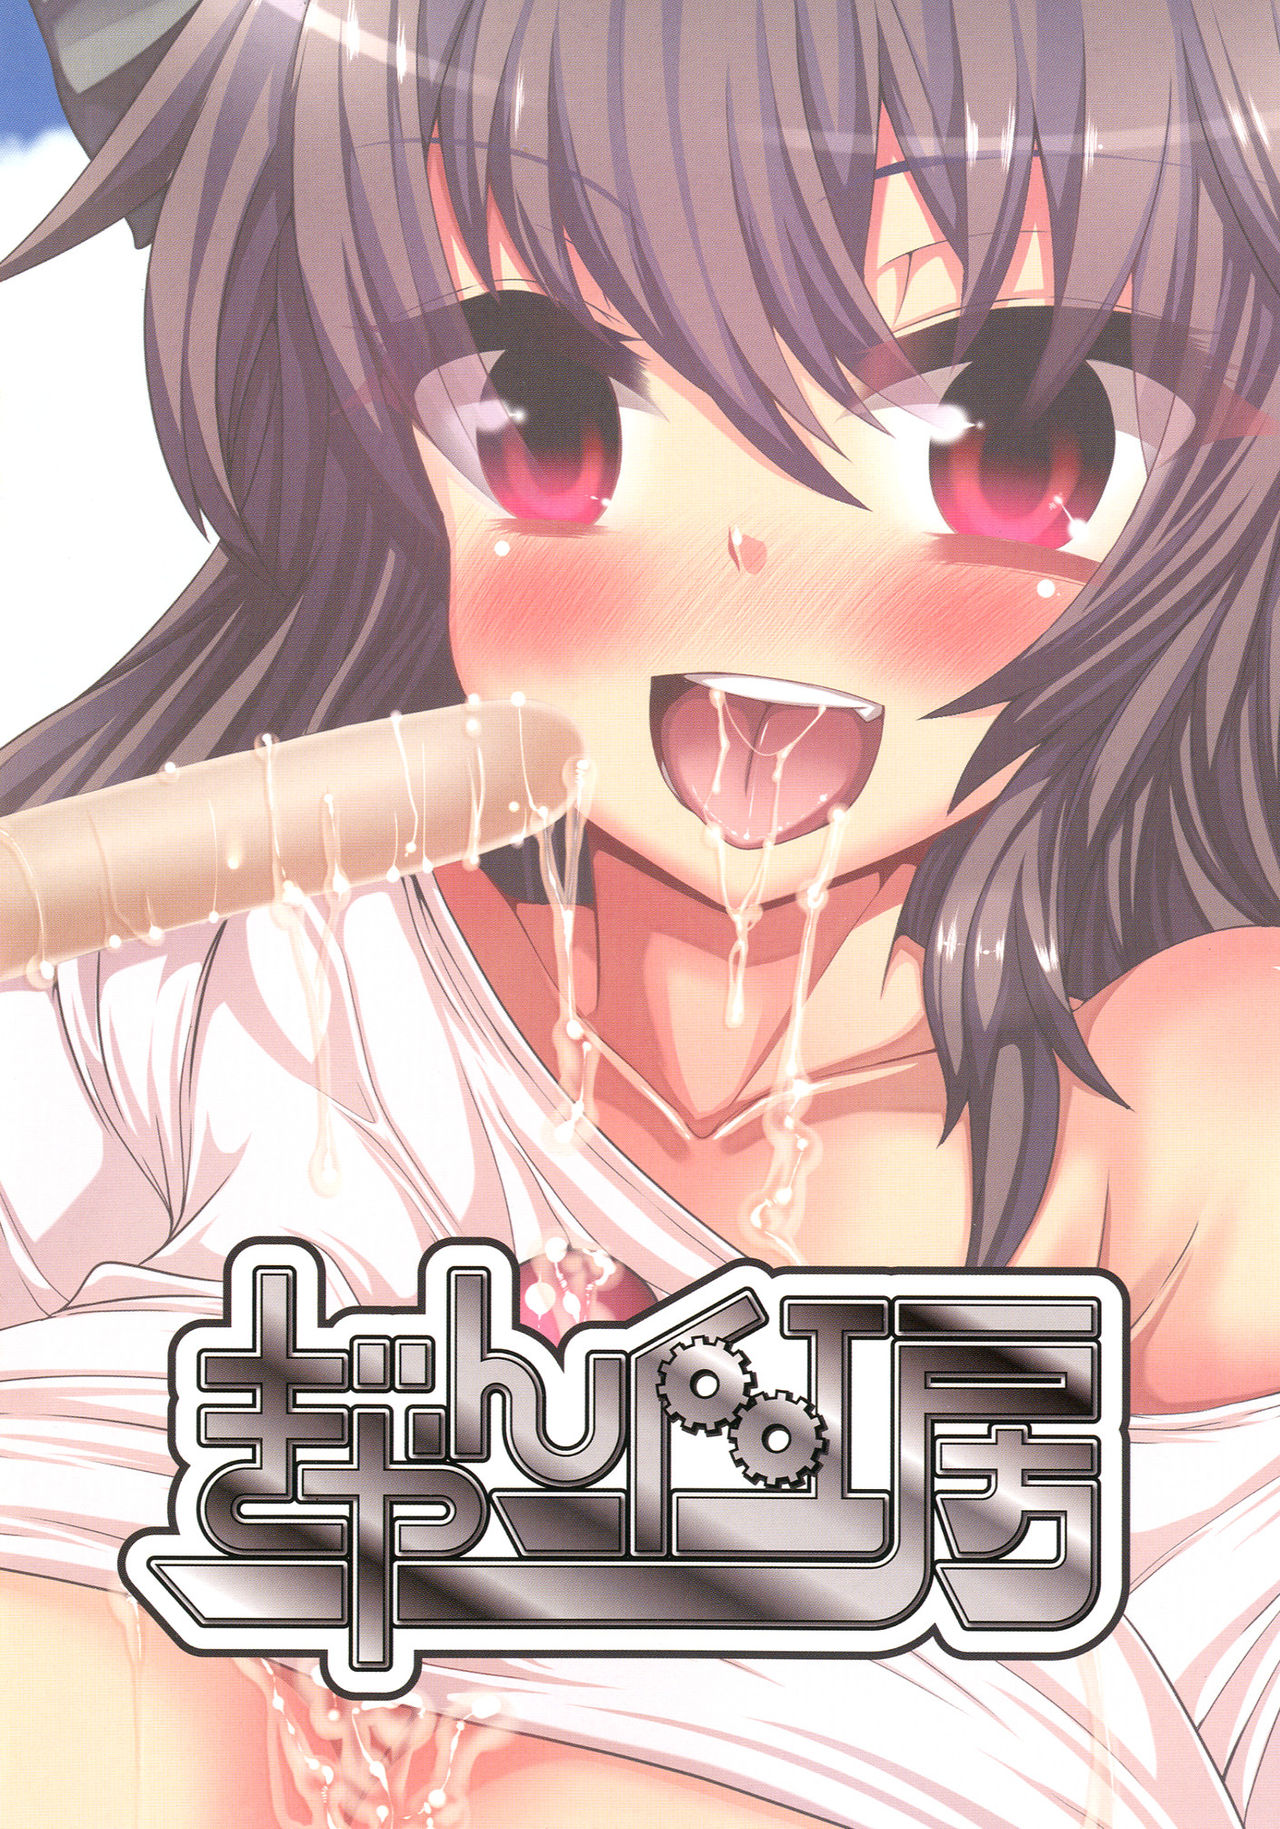 [Gang Koubou (78RR)] Okuu-chan to Kozukuri Sex Shitai! Full Color | Je veux coucher avec Okuu-chan et lui faire un enfant ! (Touhou Project) [French] [Digital] [ぎゃんぐ工房 (だぶるあーる)] お空ちゃんと子作りせっくすしたい!ふるからー (東方Project) [フランス翻訳] [DL版]